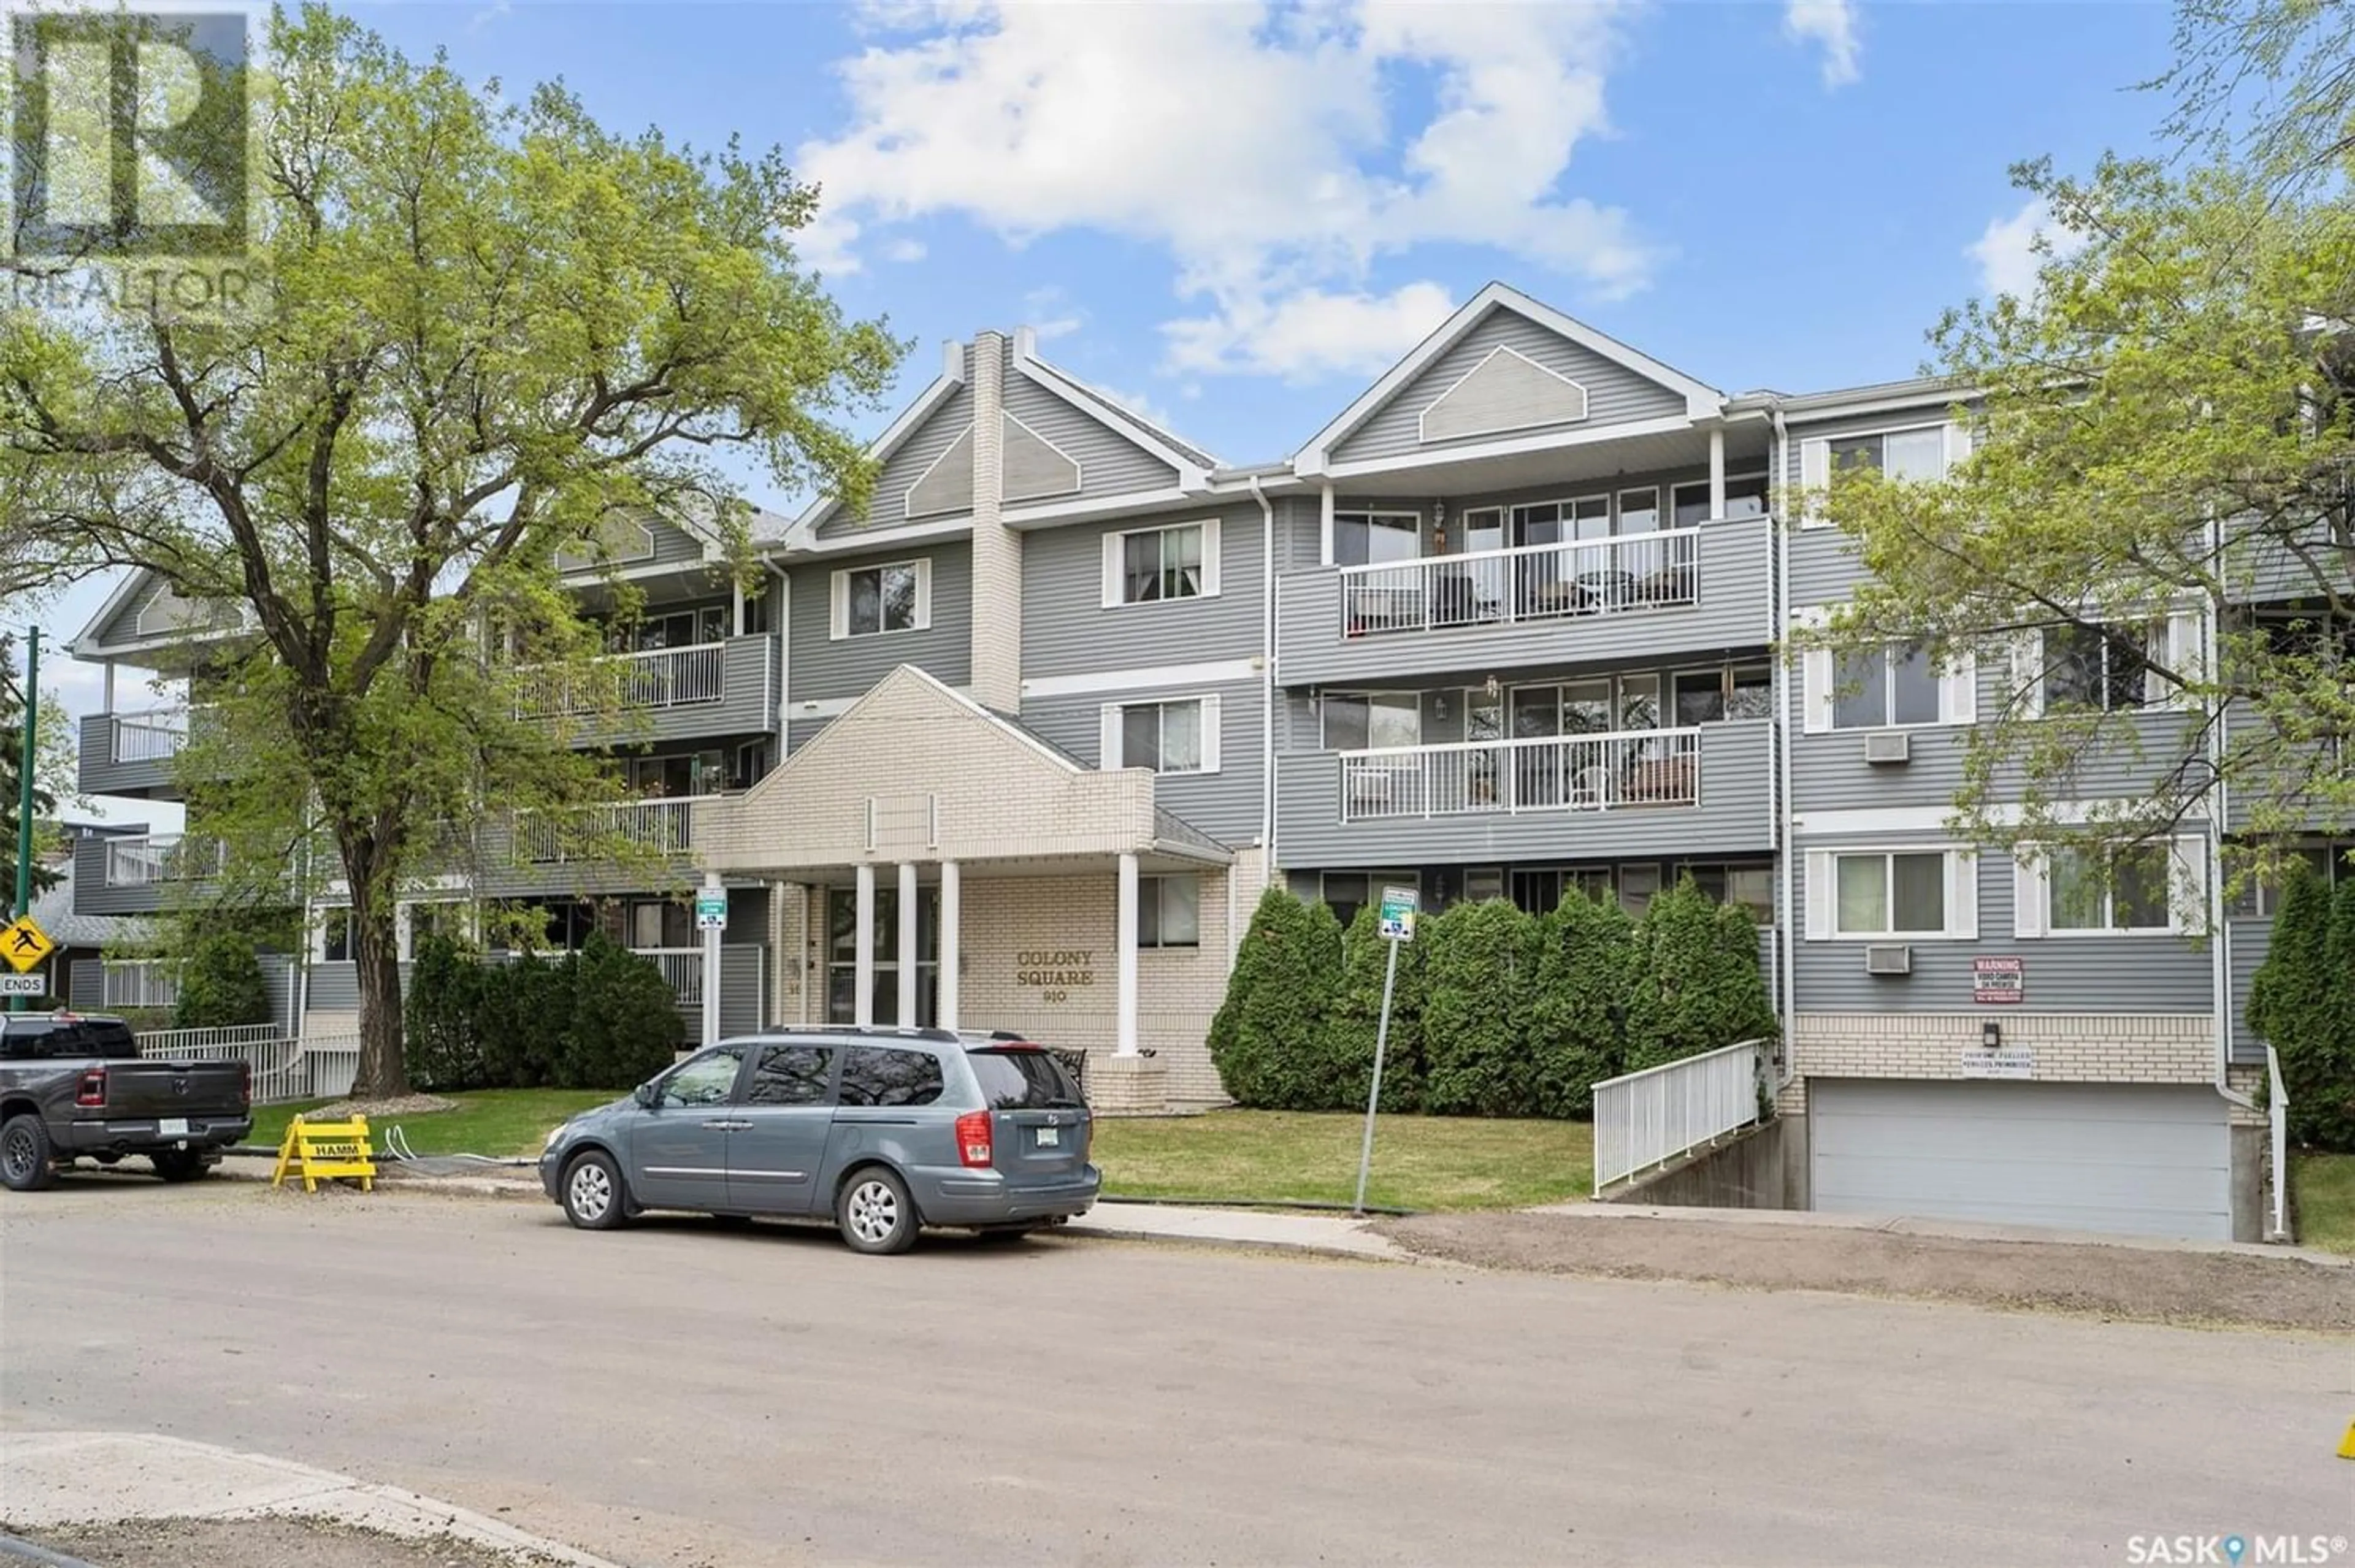 A pic from exterior of the house or condo for 208 910 9th STREET E, Saskatoon Saskatchewan S7H0N1